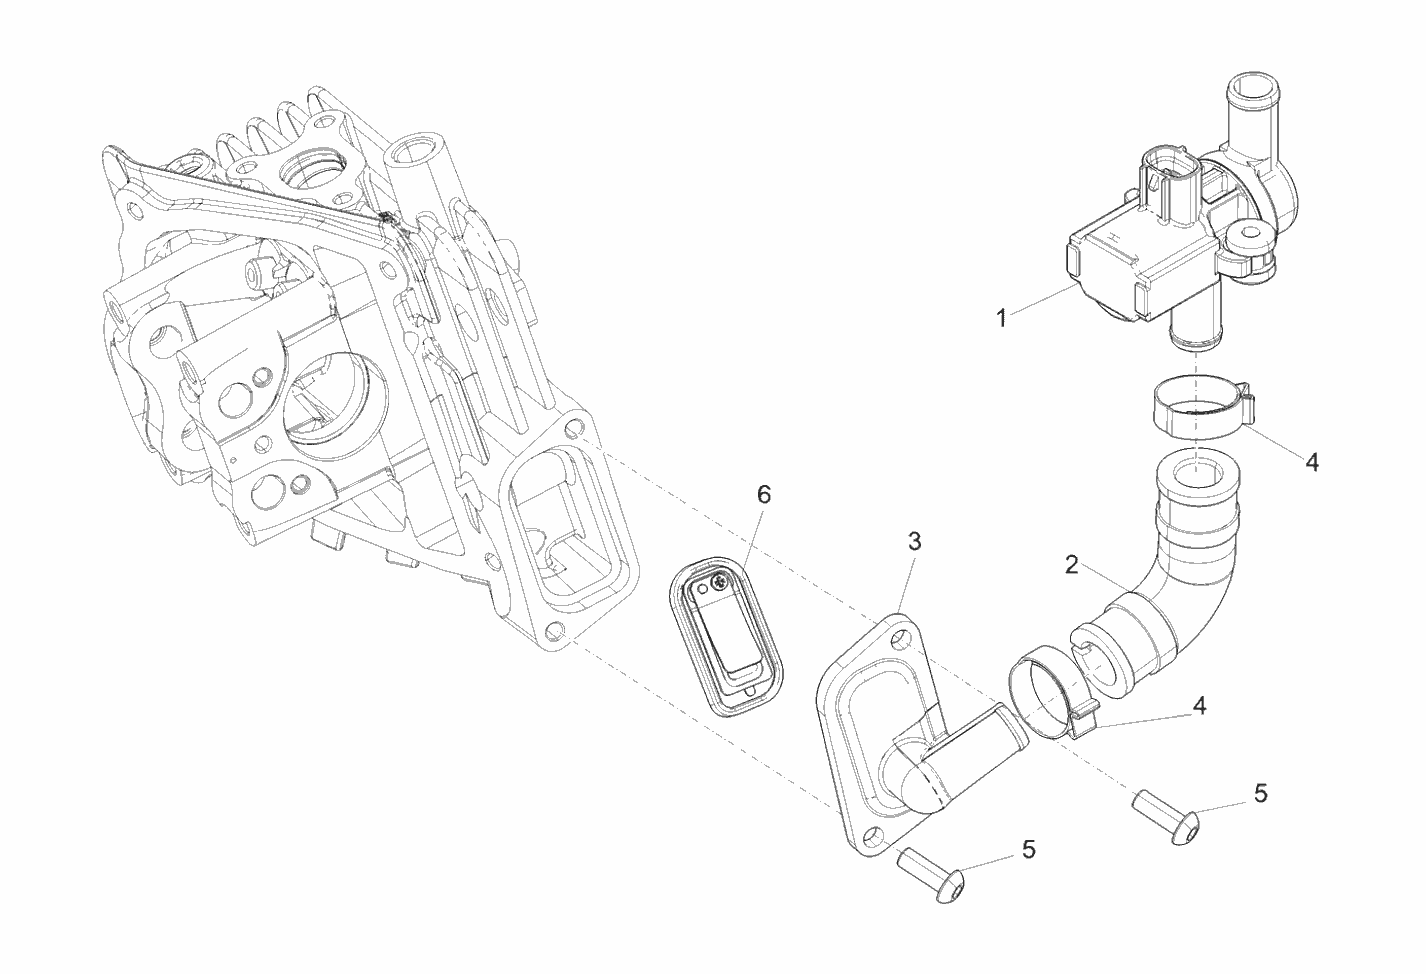 Exploded view Diaphragme - Couvercle volant inertie